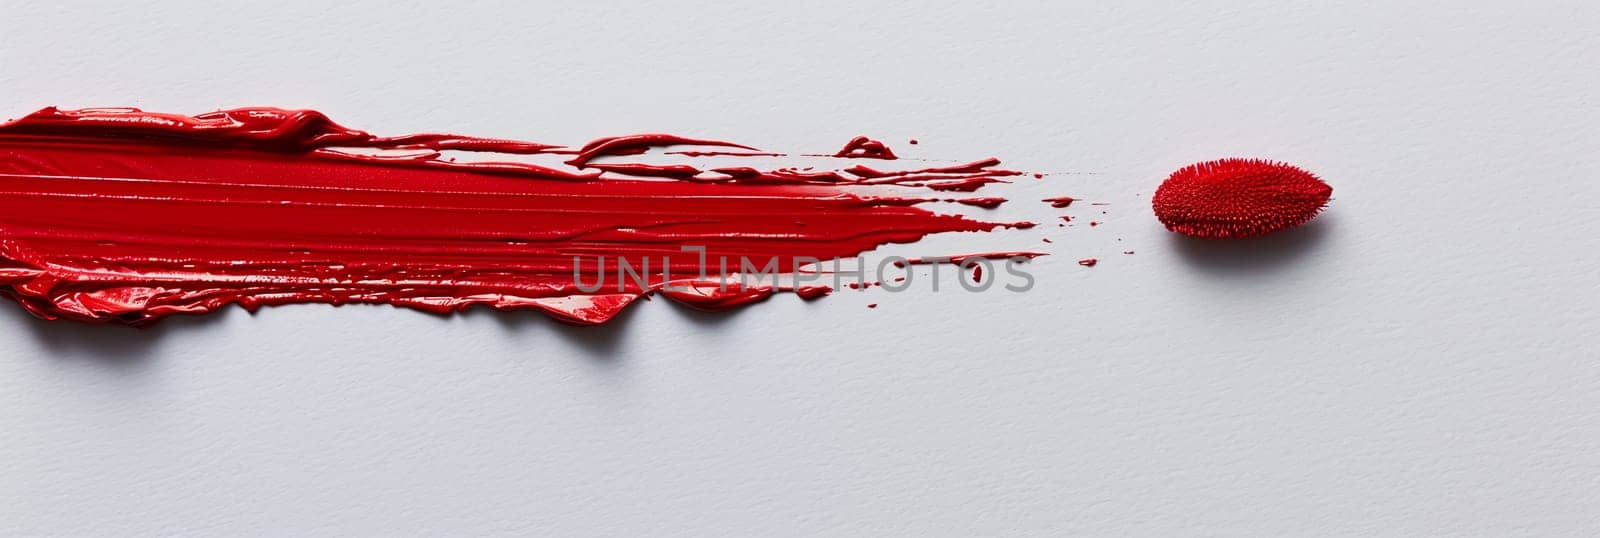 A close-up of a classic red lipstick smudge on a white surface, leaving a subtle yet powerful mark.